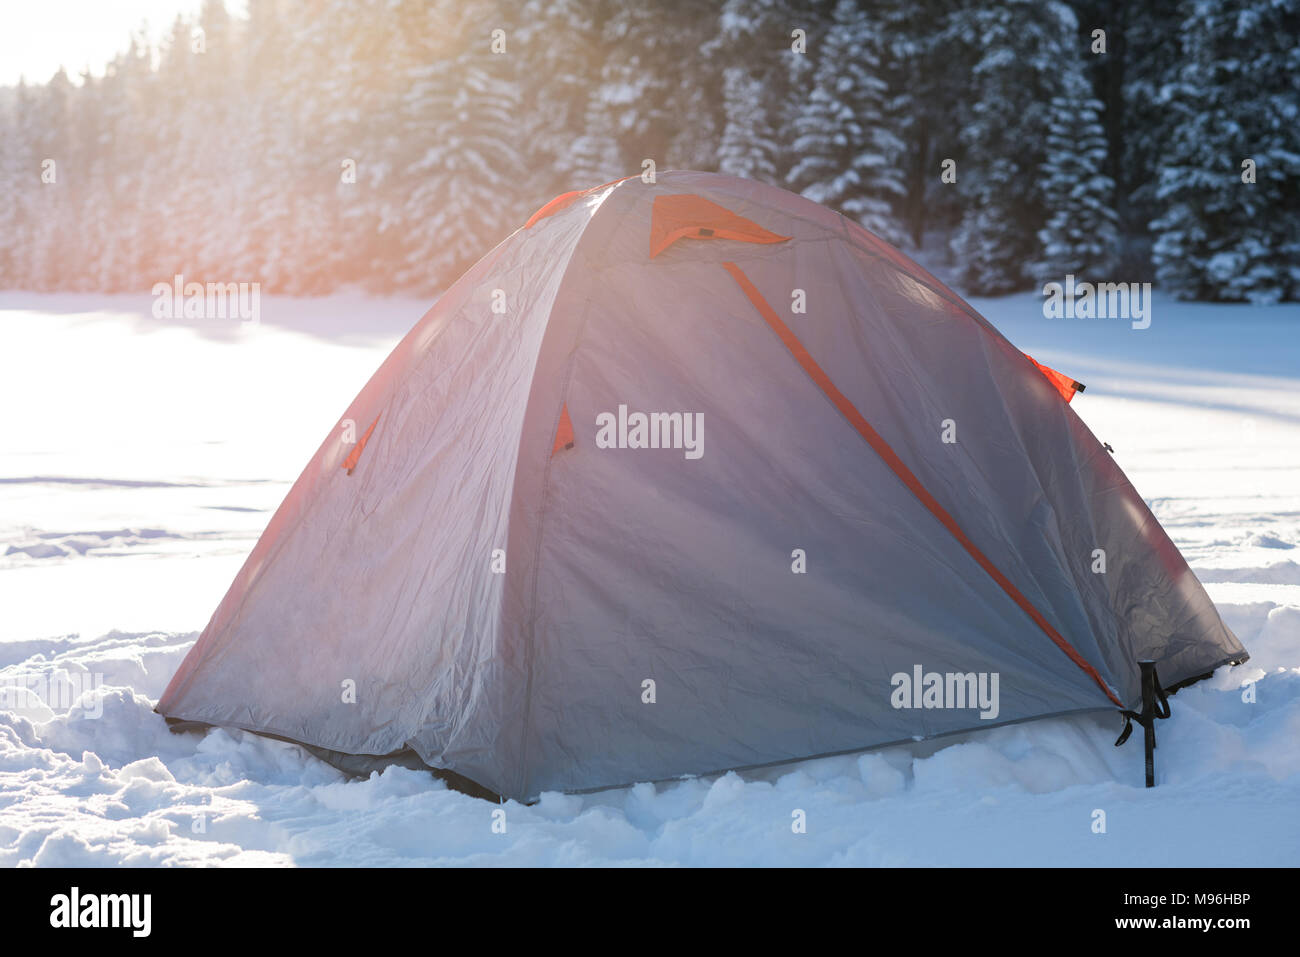 Tent in snowy landscape Stock Photo